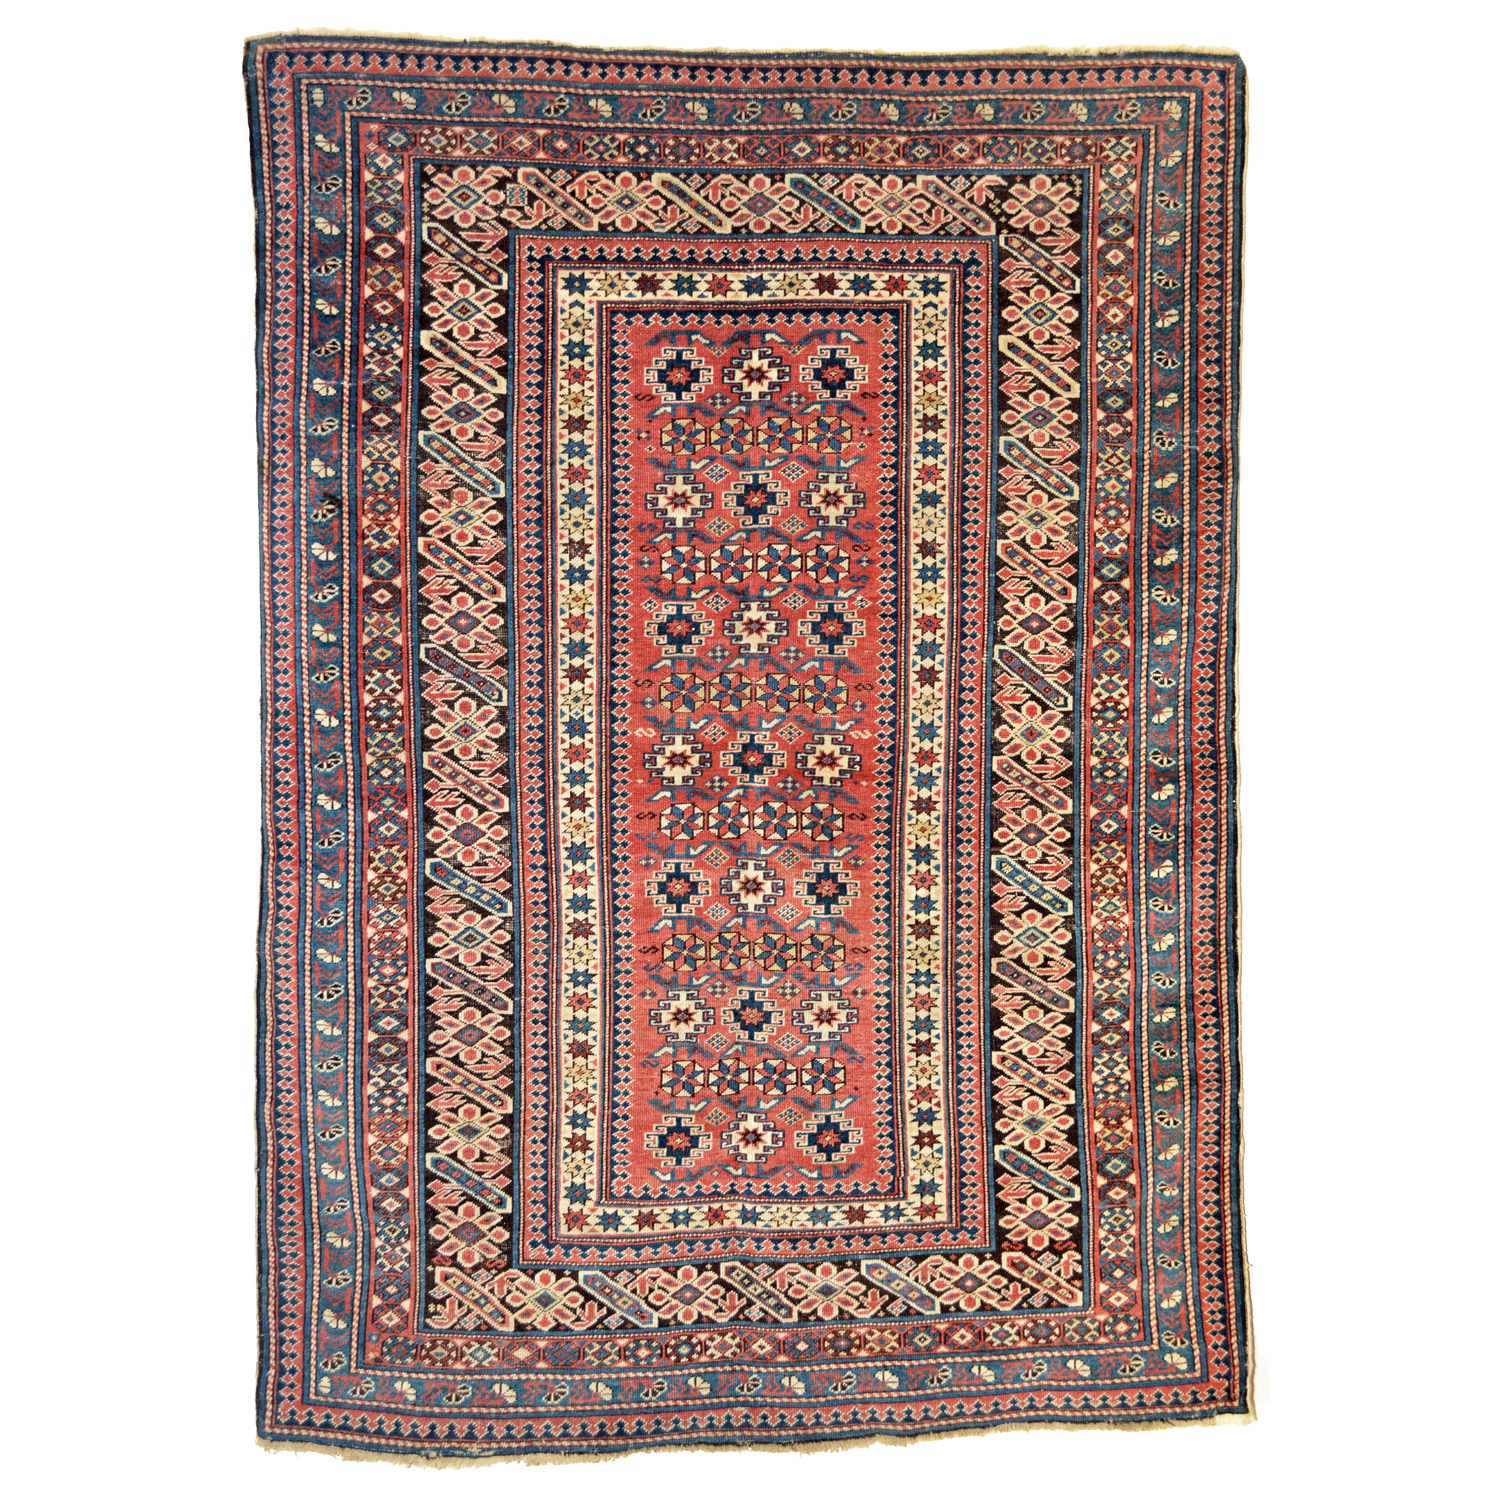 Antique Chi Chi rug, Kuba or Shirvan districts, northeast Caucasus, circa 1900 - Antique Chi Chi rugs are prized by collectors of antique Caucasian rugs for their distinctive designs. In this piece, the deep salmon color field has an all-over design framed by the classic Chi Chi style border on a brown background. Douglas Stock Gallery, antique Oriental rugs Boston,MA area and New York by appointment. Shop in South Natick, Massachusetts, New England